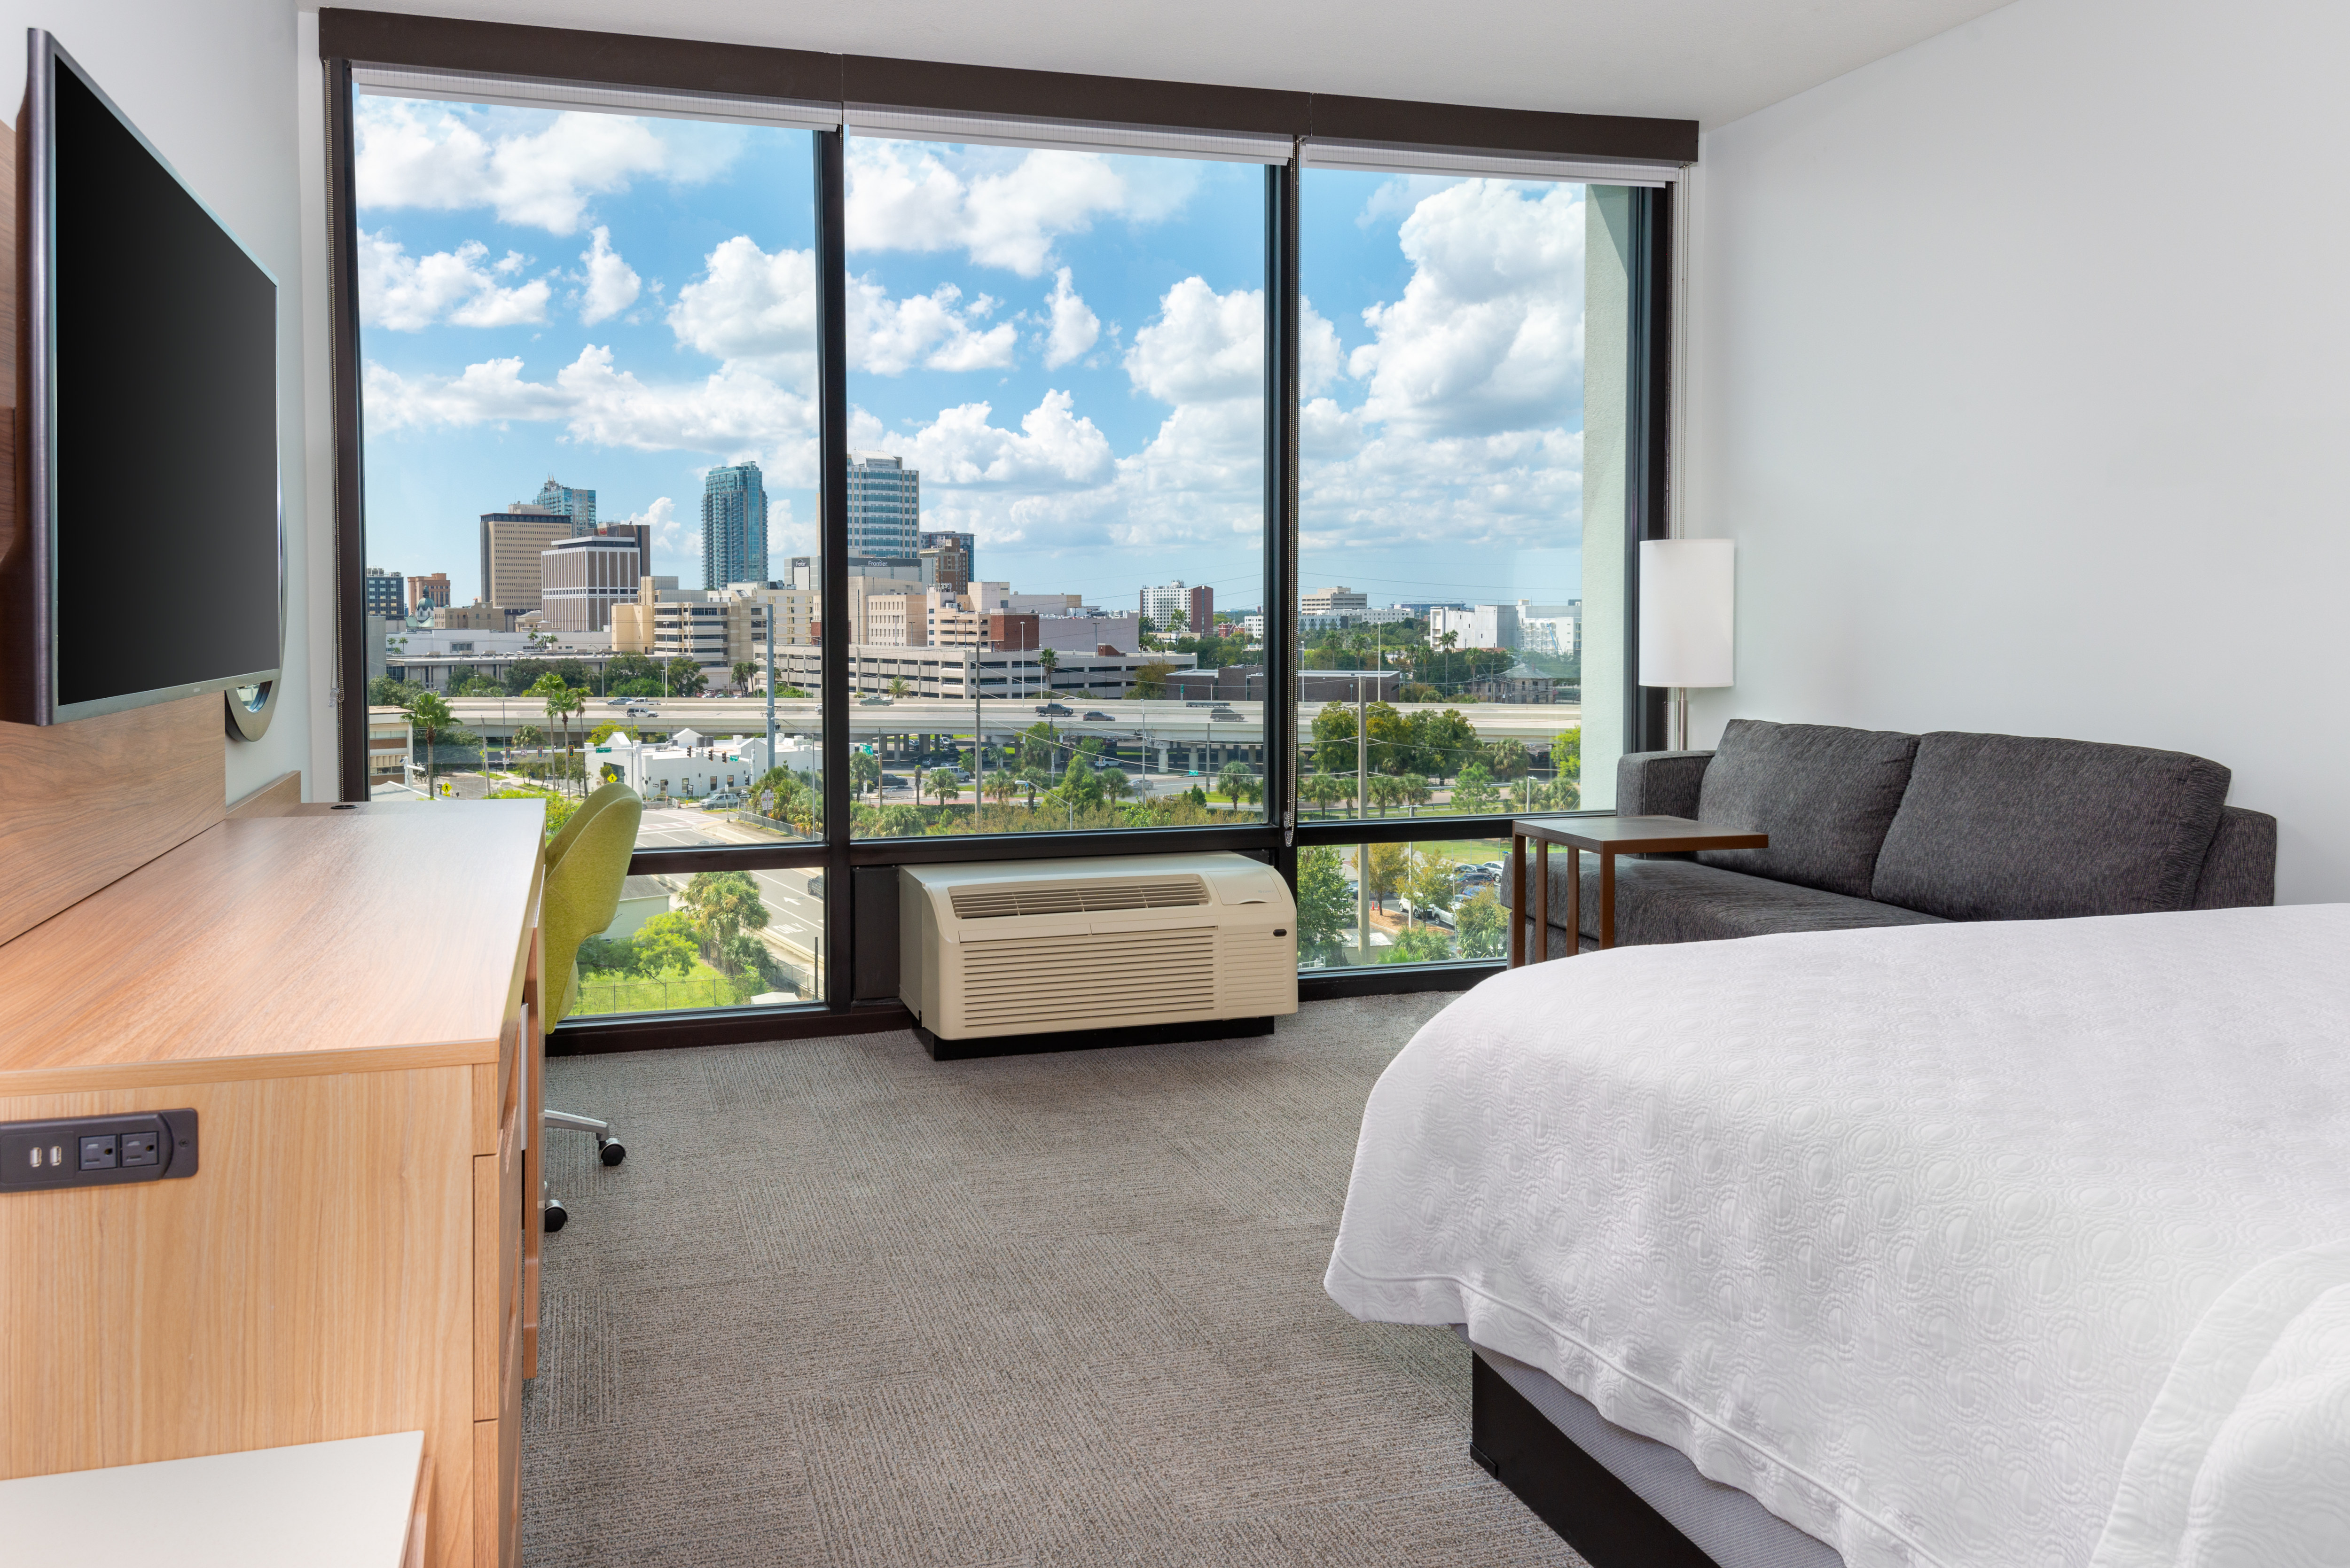 King Bedroom With City View